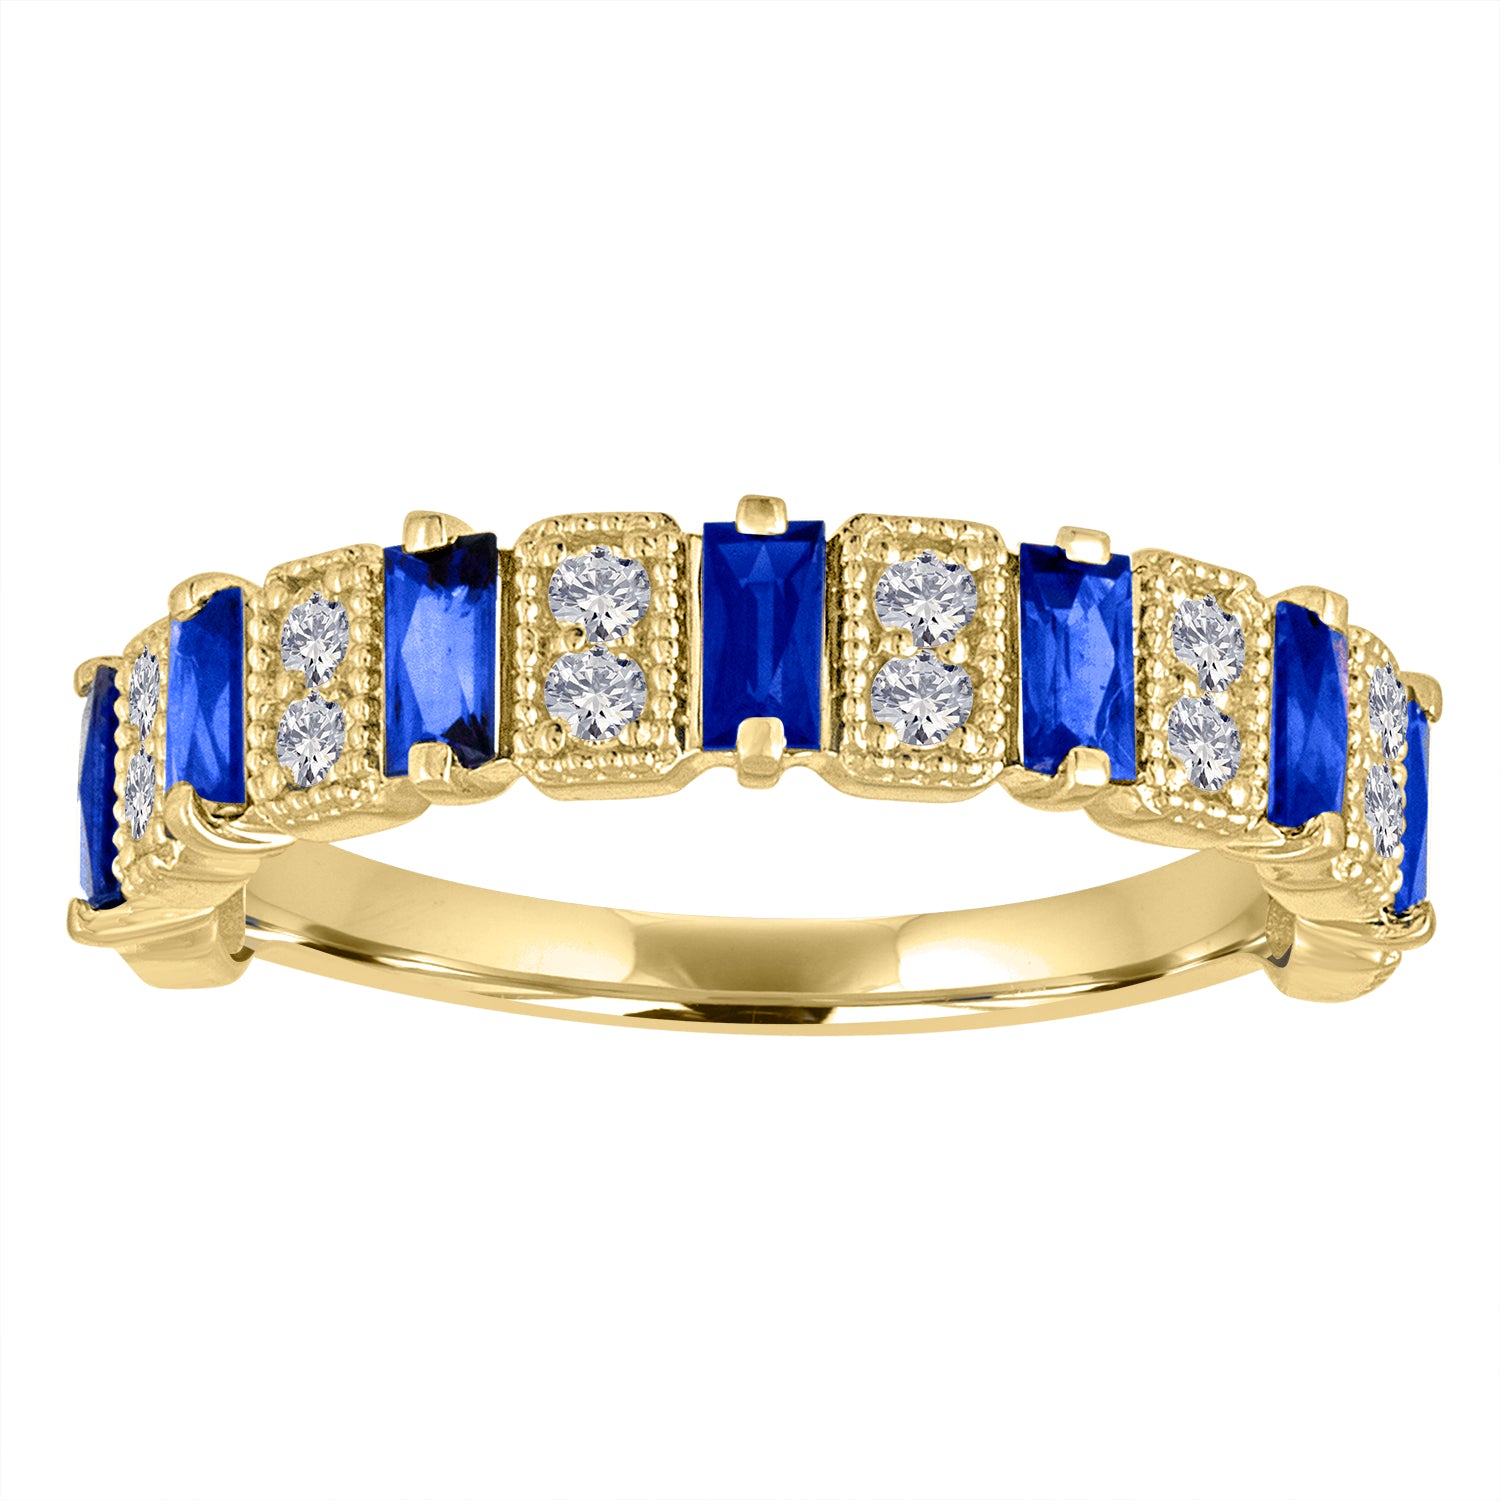 Yellow gold wide band with blue sapphire baguettes and round diamonds.